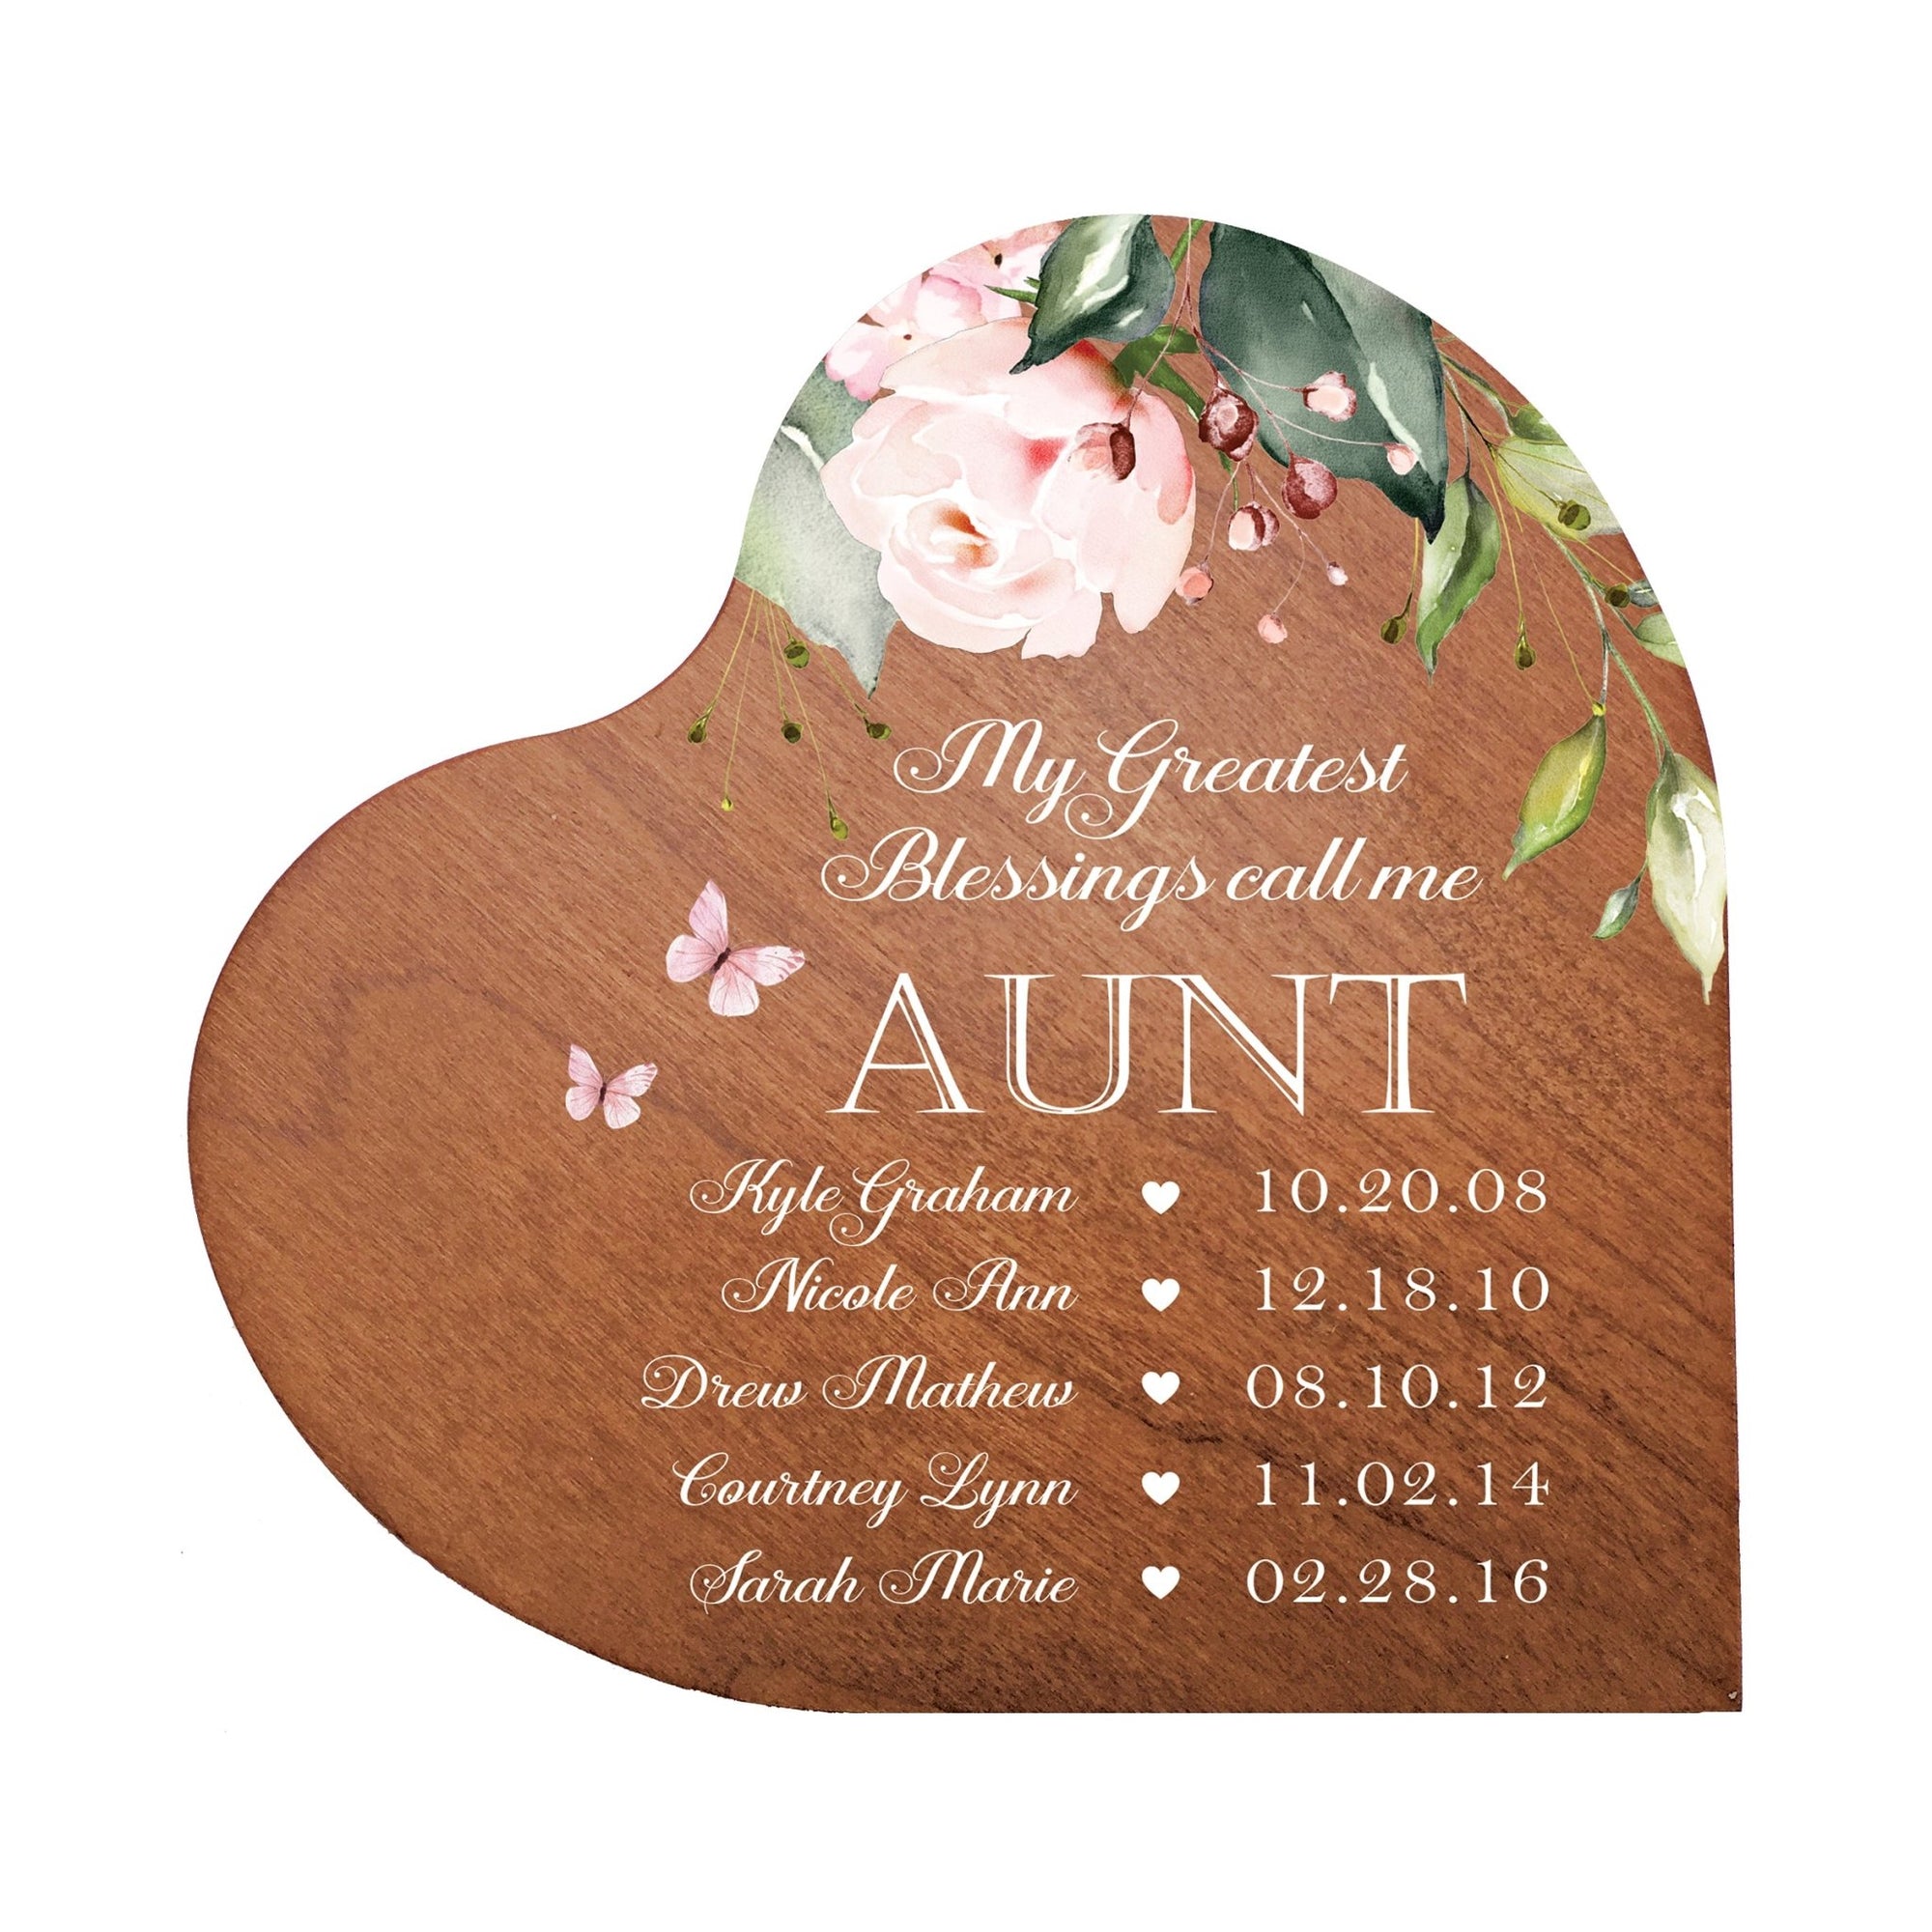 Personalized Inspiring Aunt's Love Wooden Heart Block 5in Great - My Greatest Blessings - Aunt - LifeSong Milestones